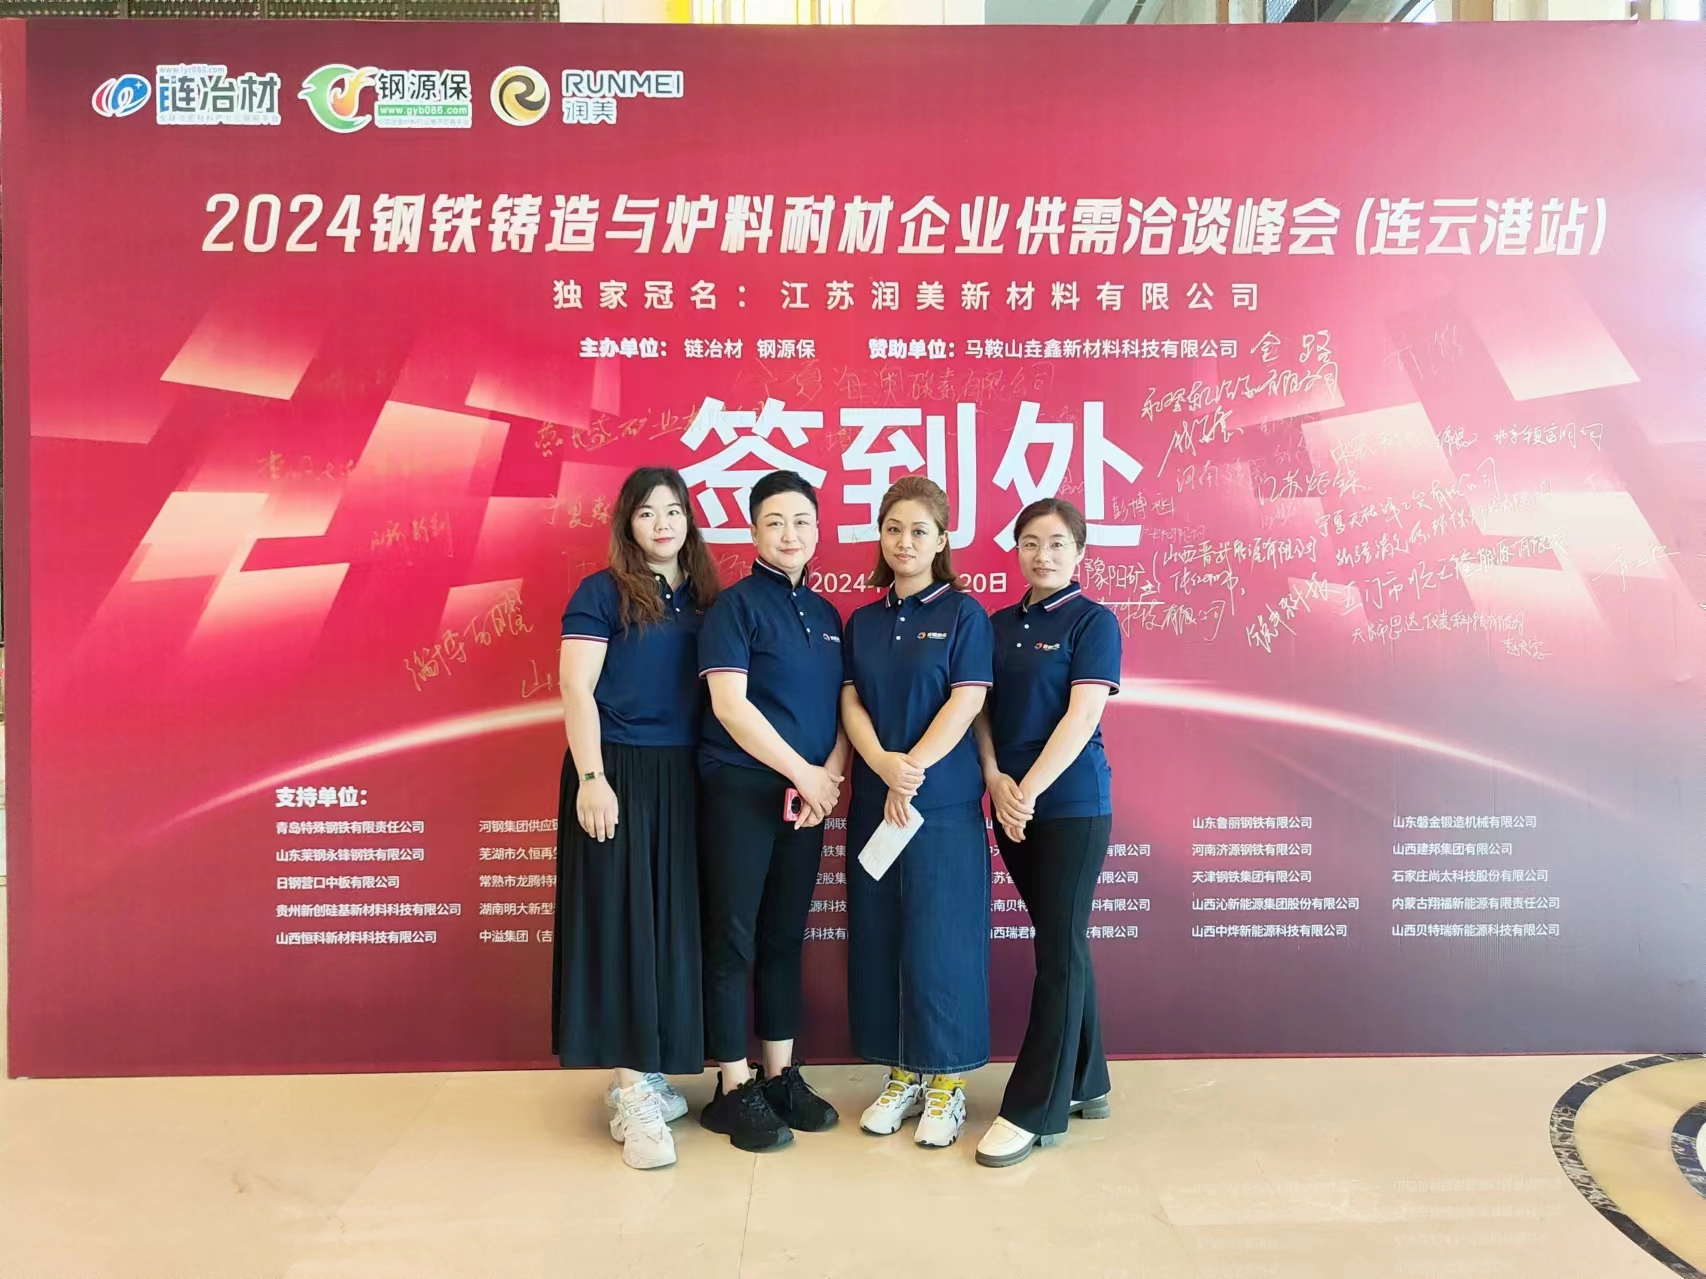 Jiyao demonstrated its strength at the Lianyungang Steel Casting Summit to deepen industry cooperation.